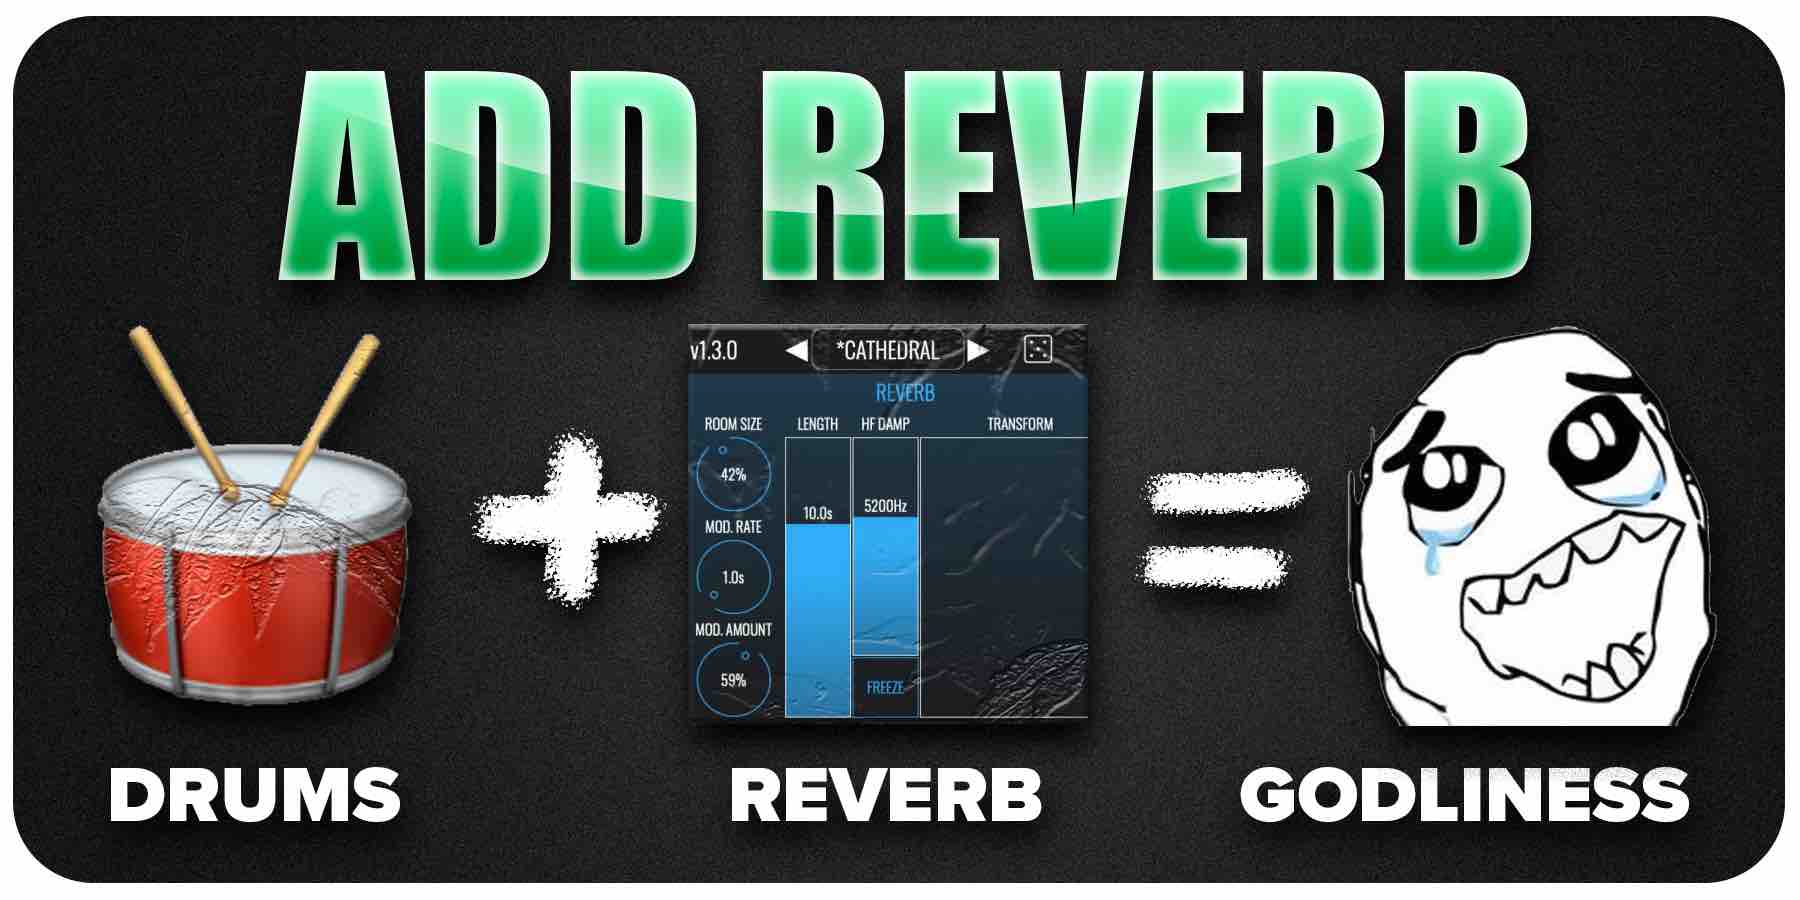 How to Add Reverb to Drums